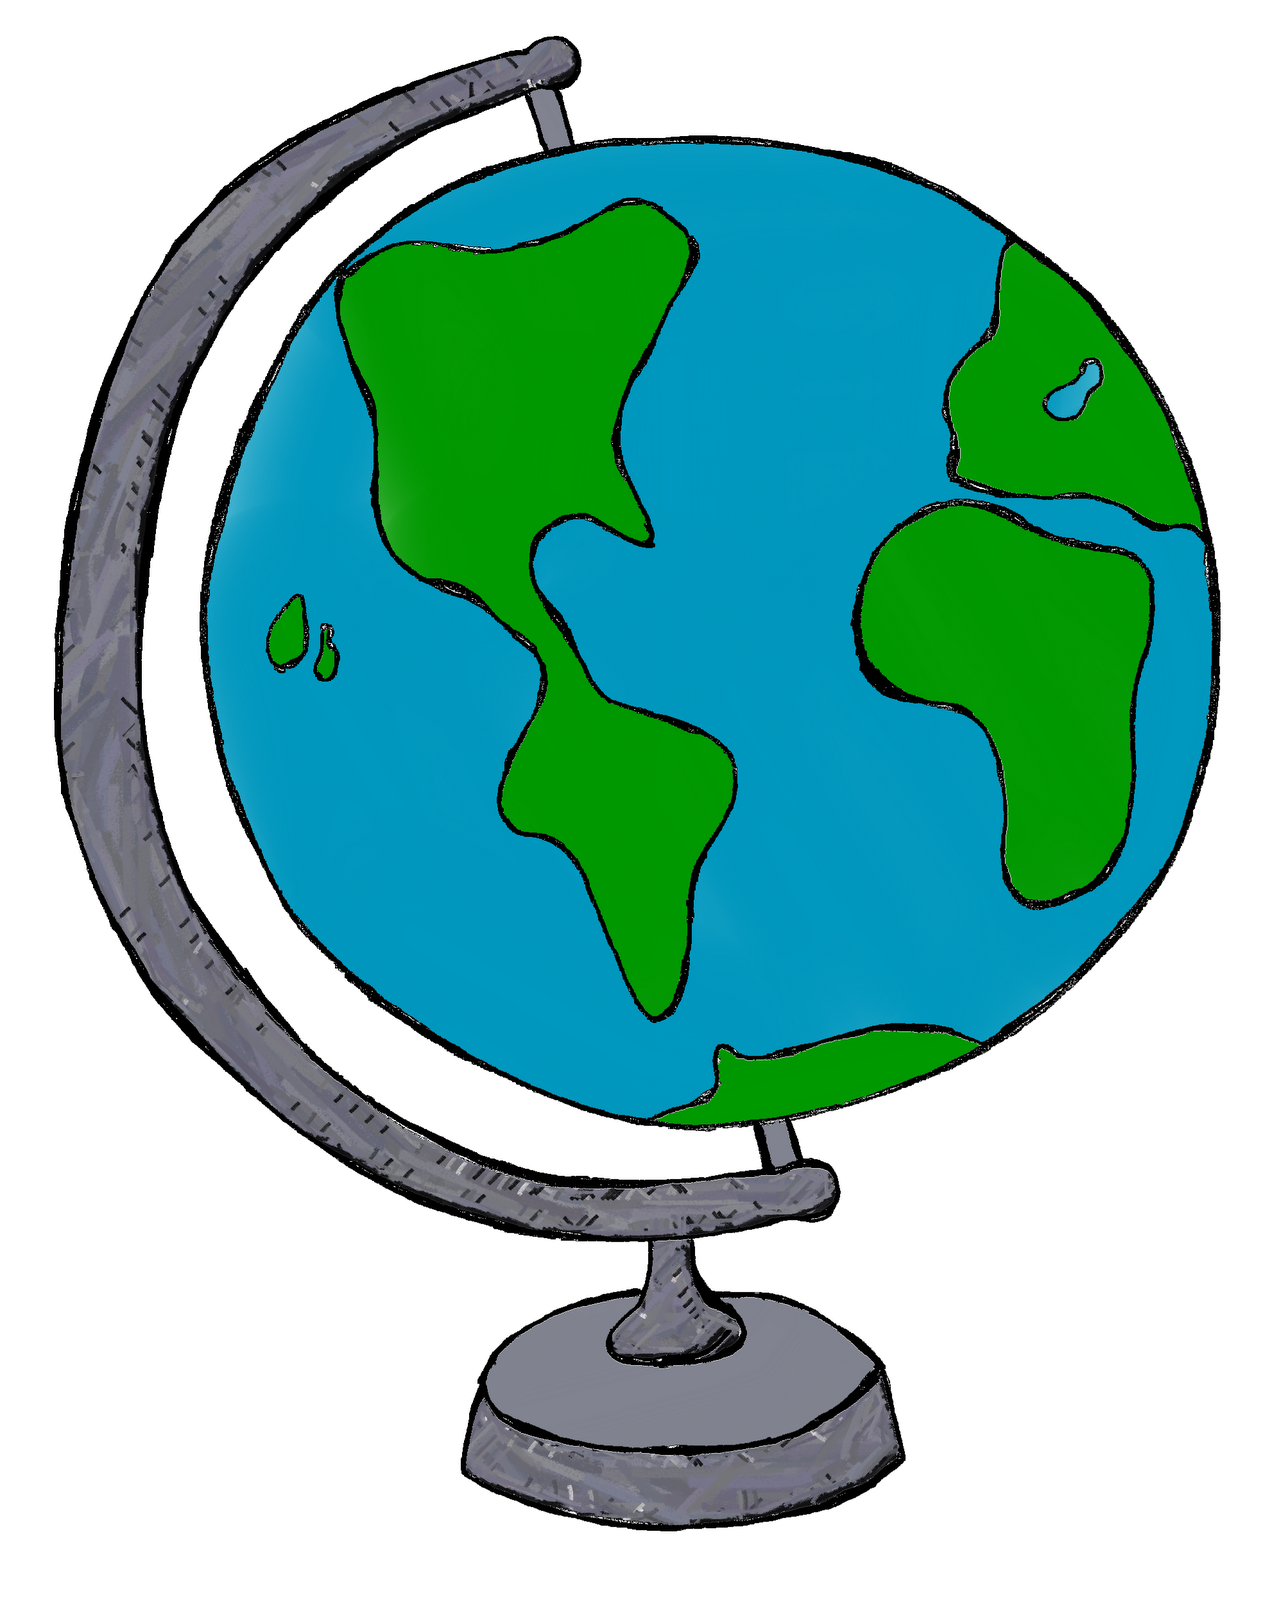 Earth clipart black and white free images 4